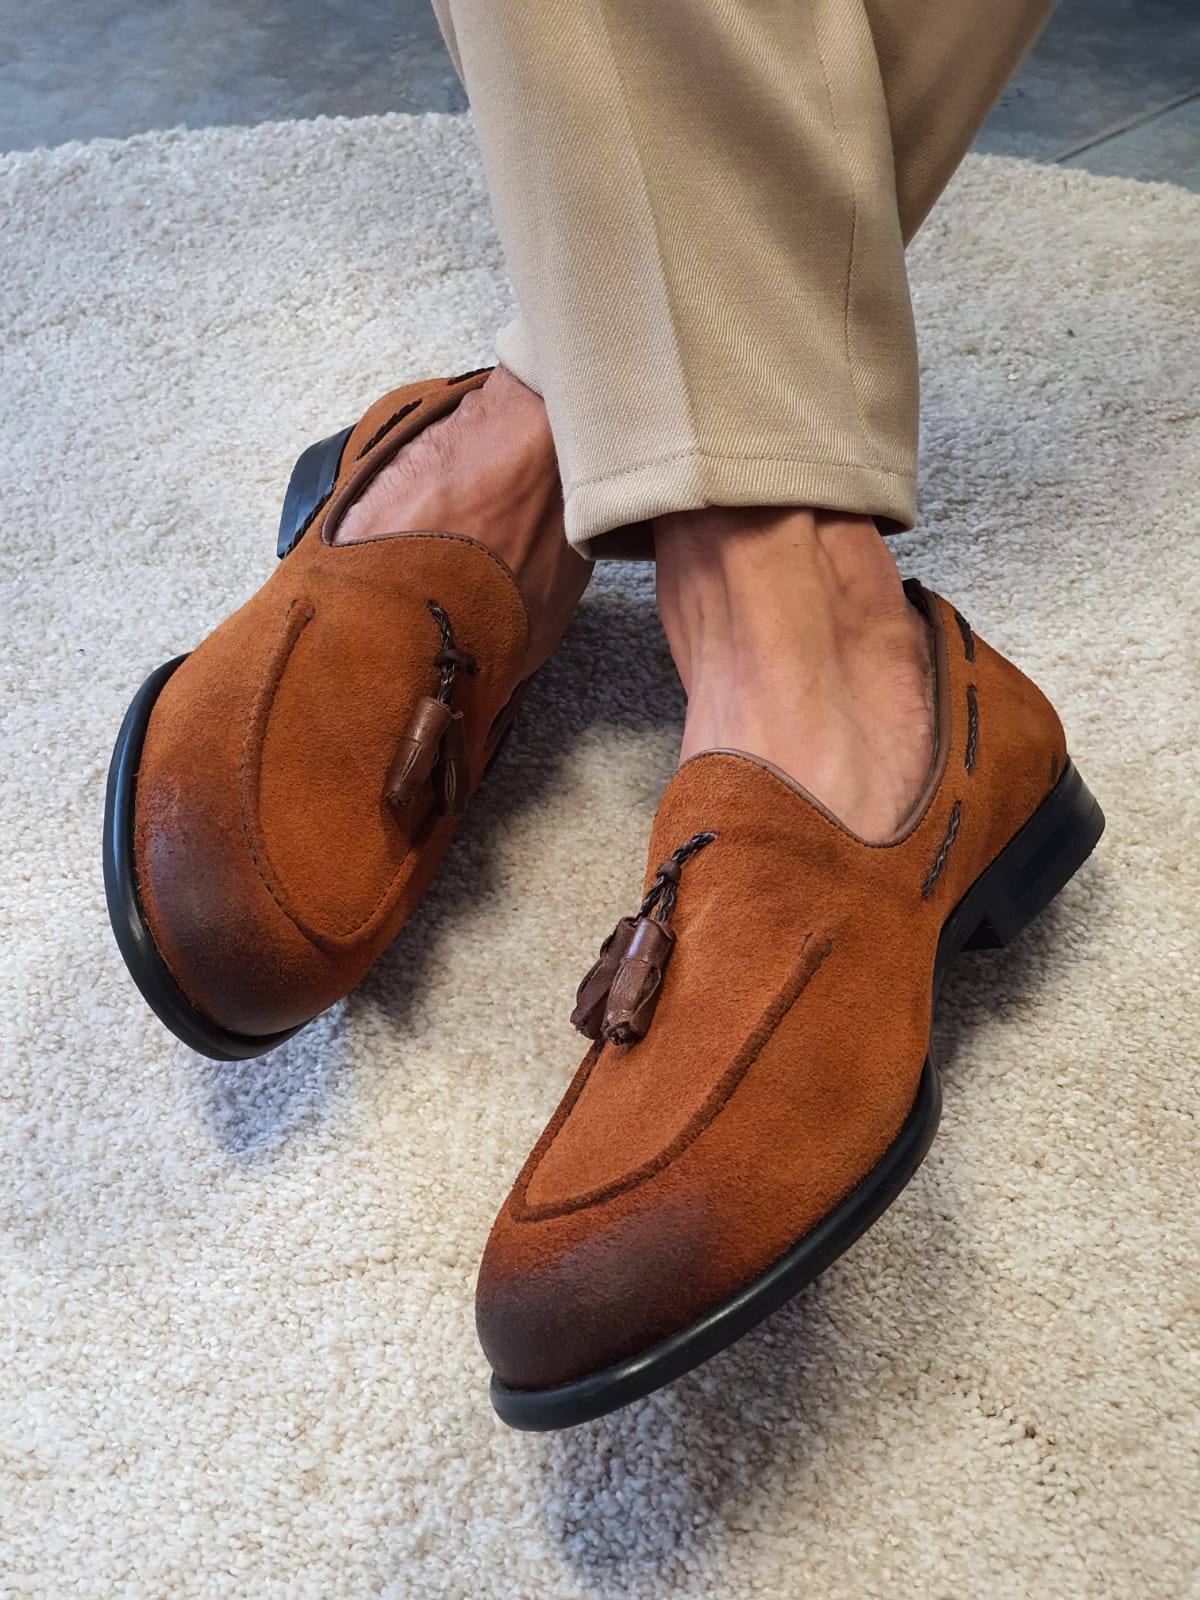 Best Footwear for Every College Guy by GentWith Blog